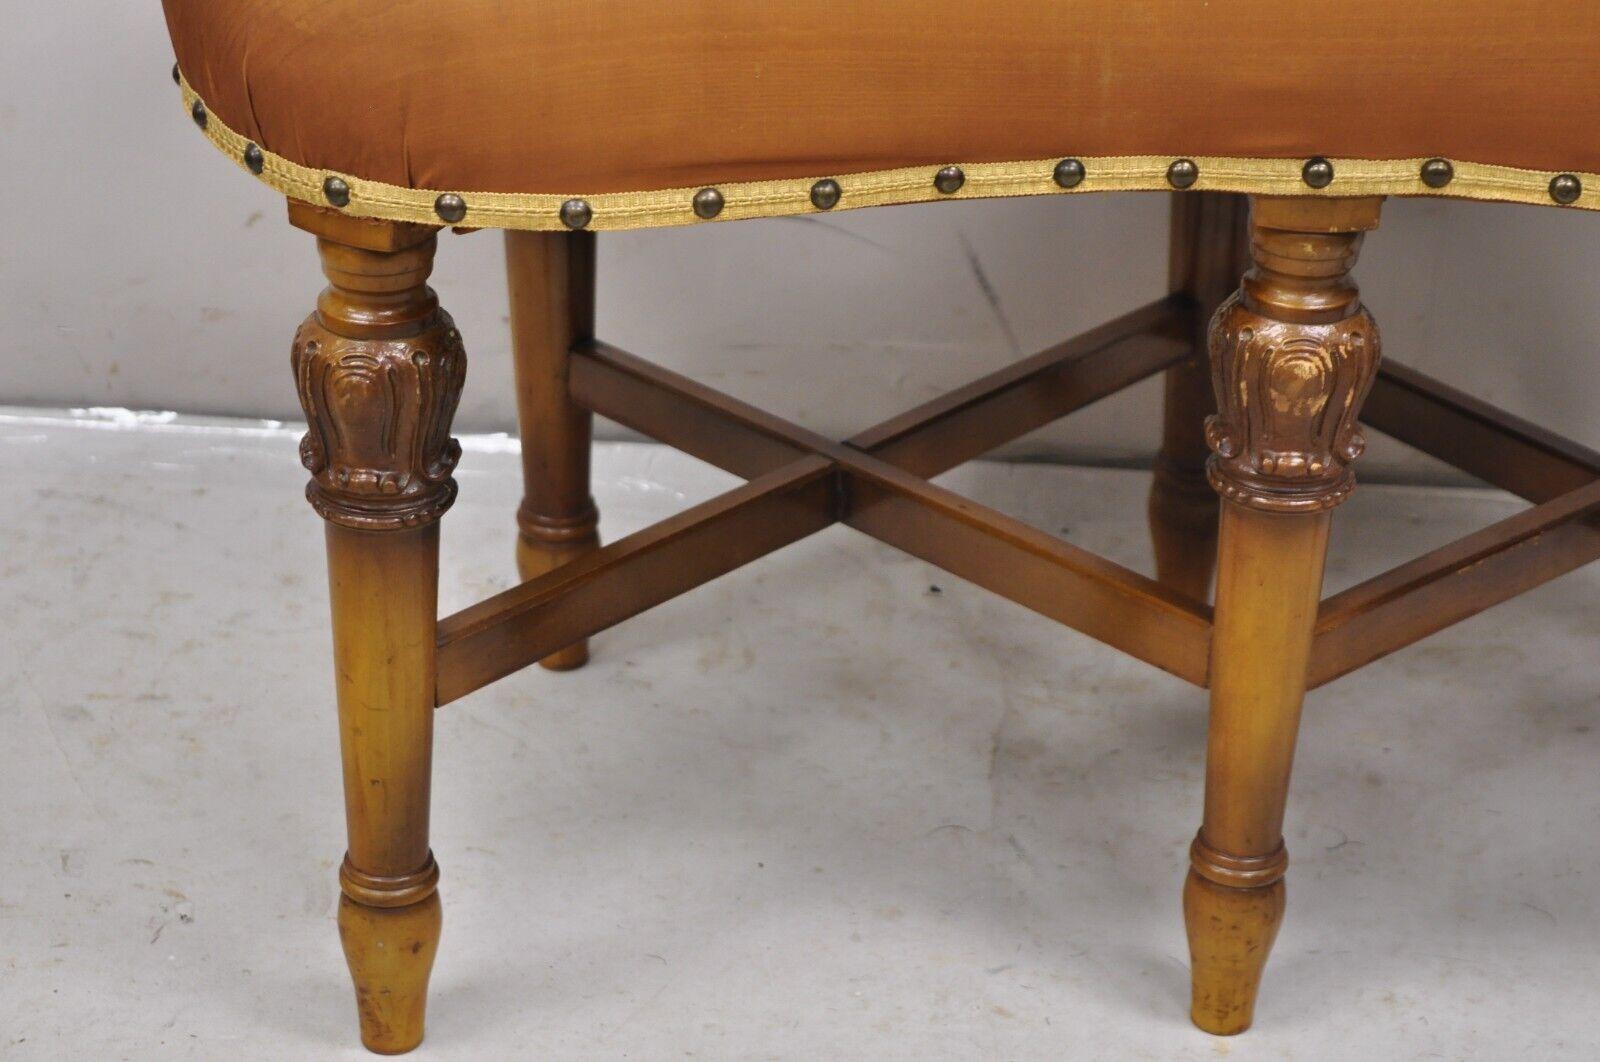 Antique Joerns Bros Kidney Bean 6 Leg French Provincial Vanity Bench Seat For Sale 2